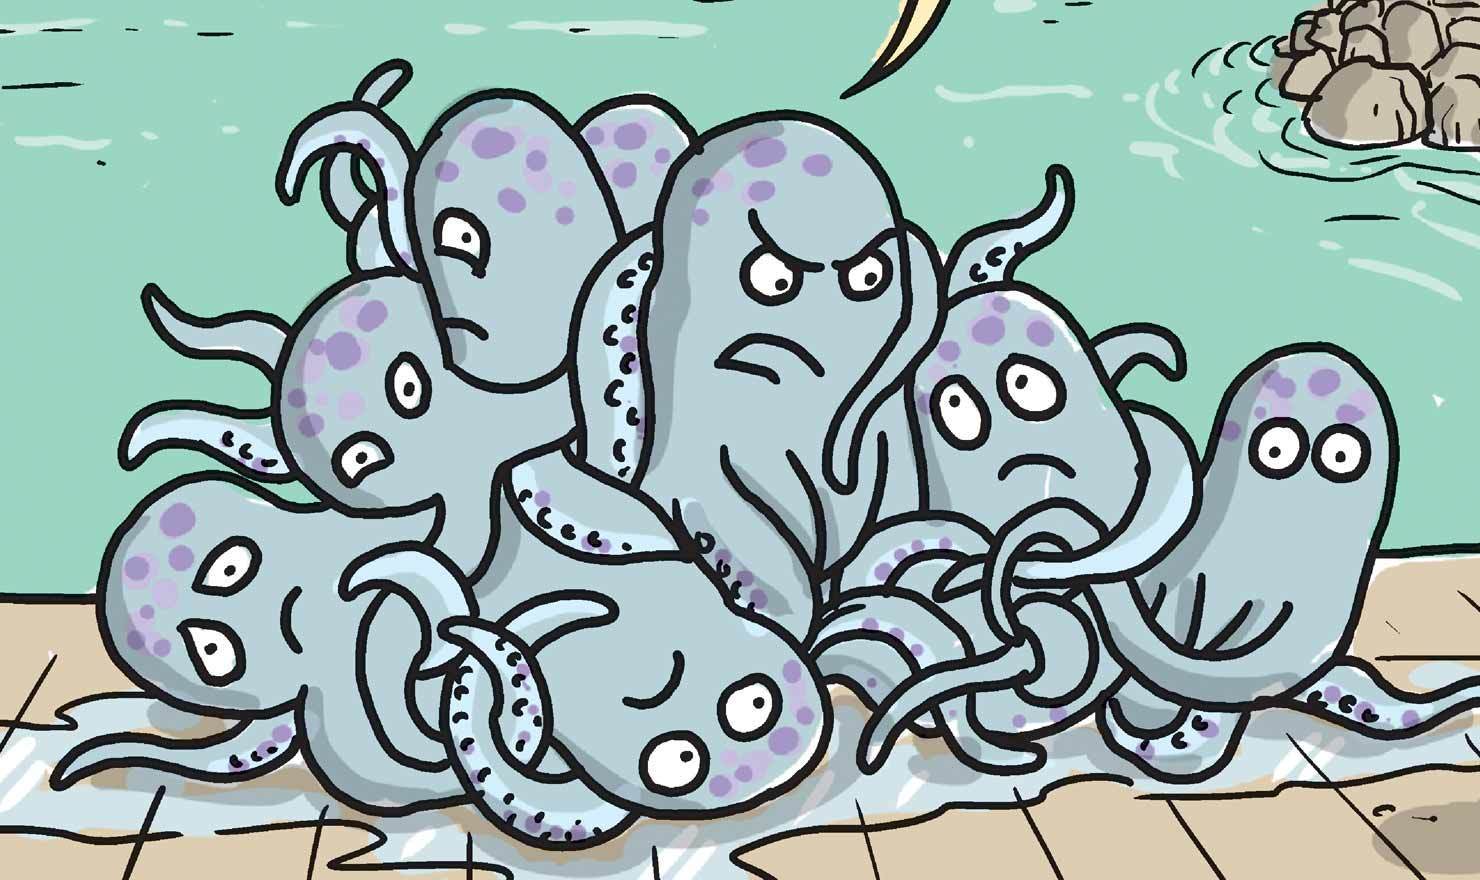 8 Inky Comics For Octopus Day